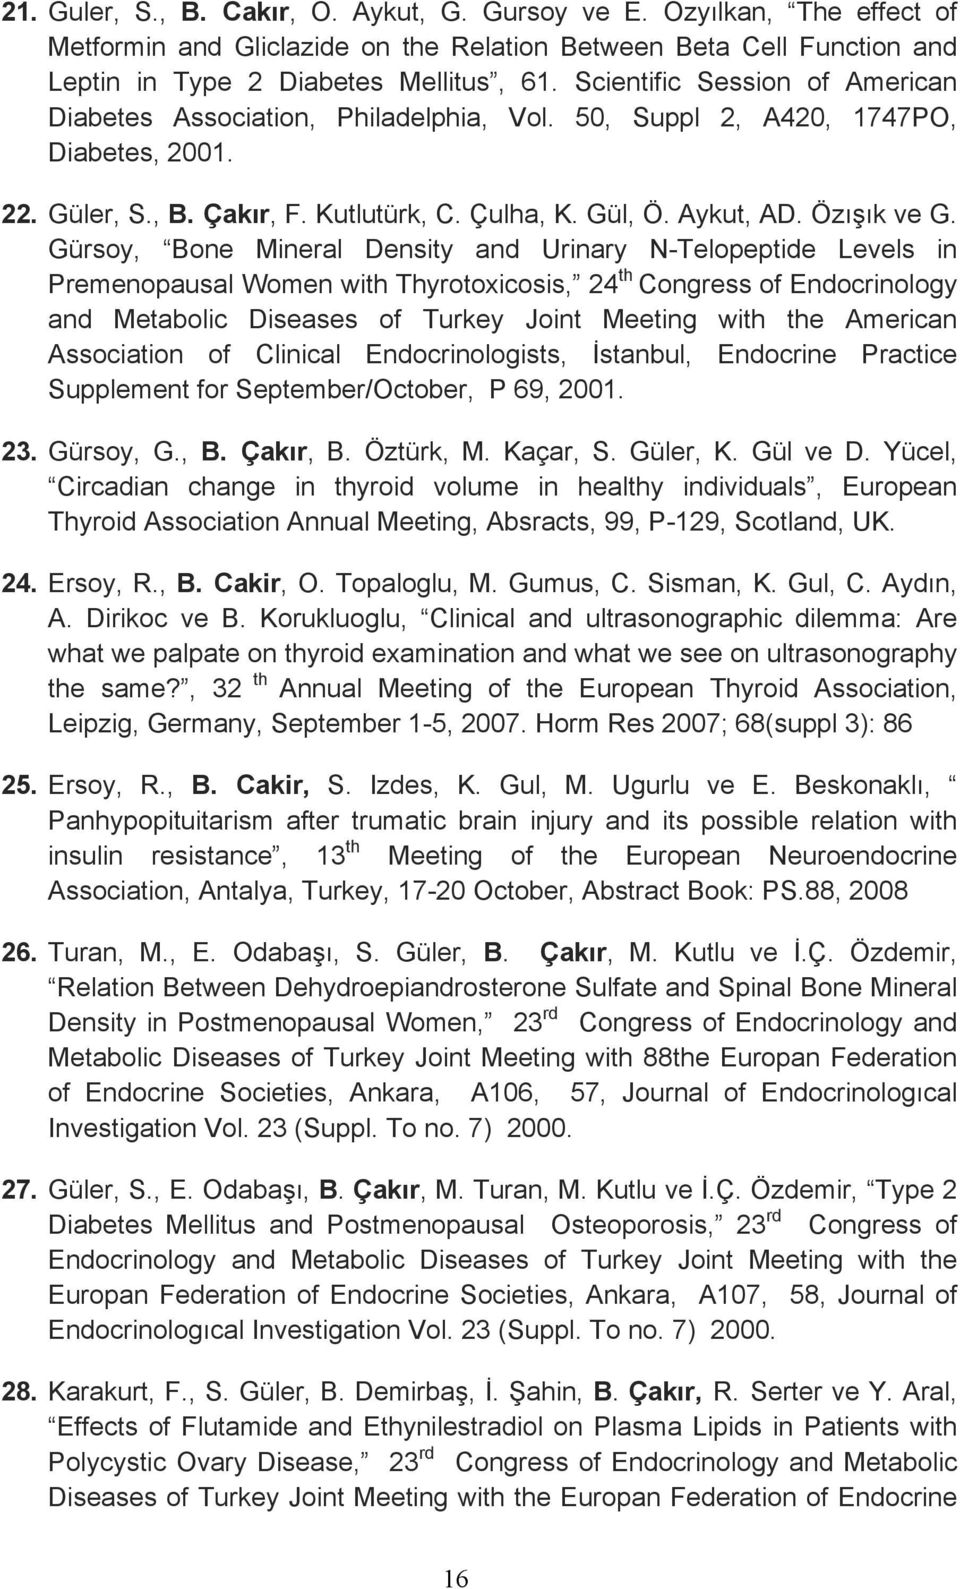 Gürsoy, Bone Mineral Density and Urinary N-Telopeptide Levels in Premenopausal Women with Thyrotoxicosis, 24 th Congress of Endocrinology and Metabolic Diseases of Turkey Joint Meeting with the